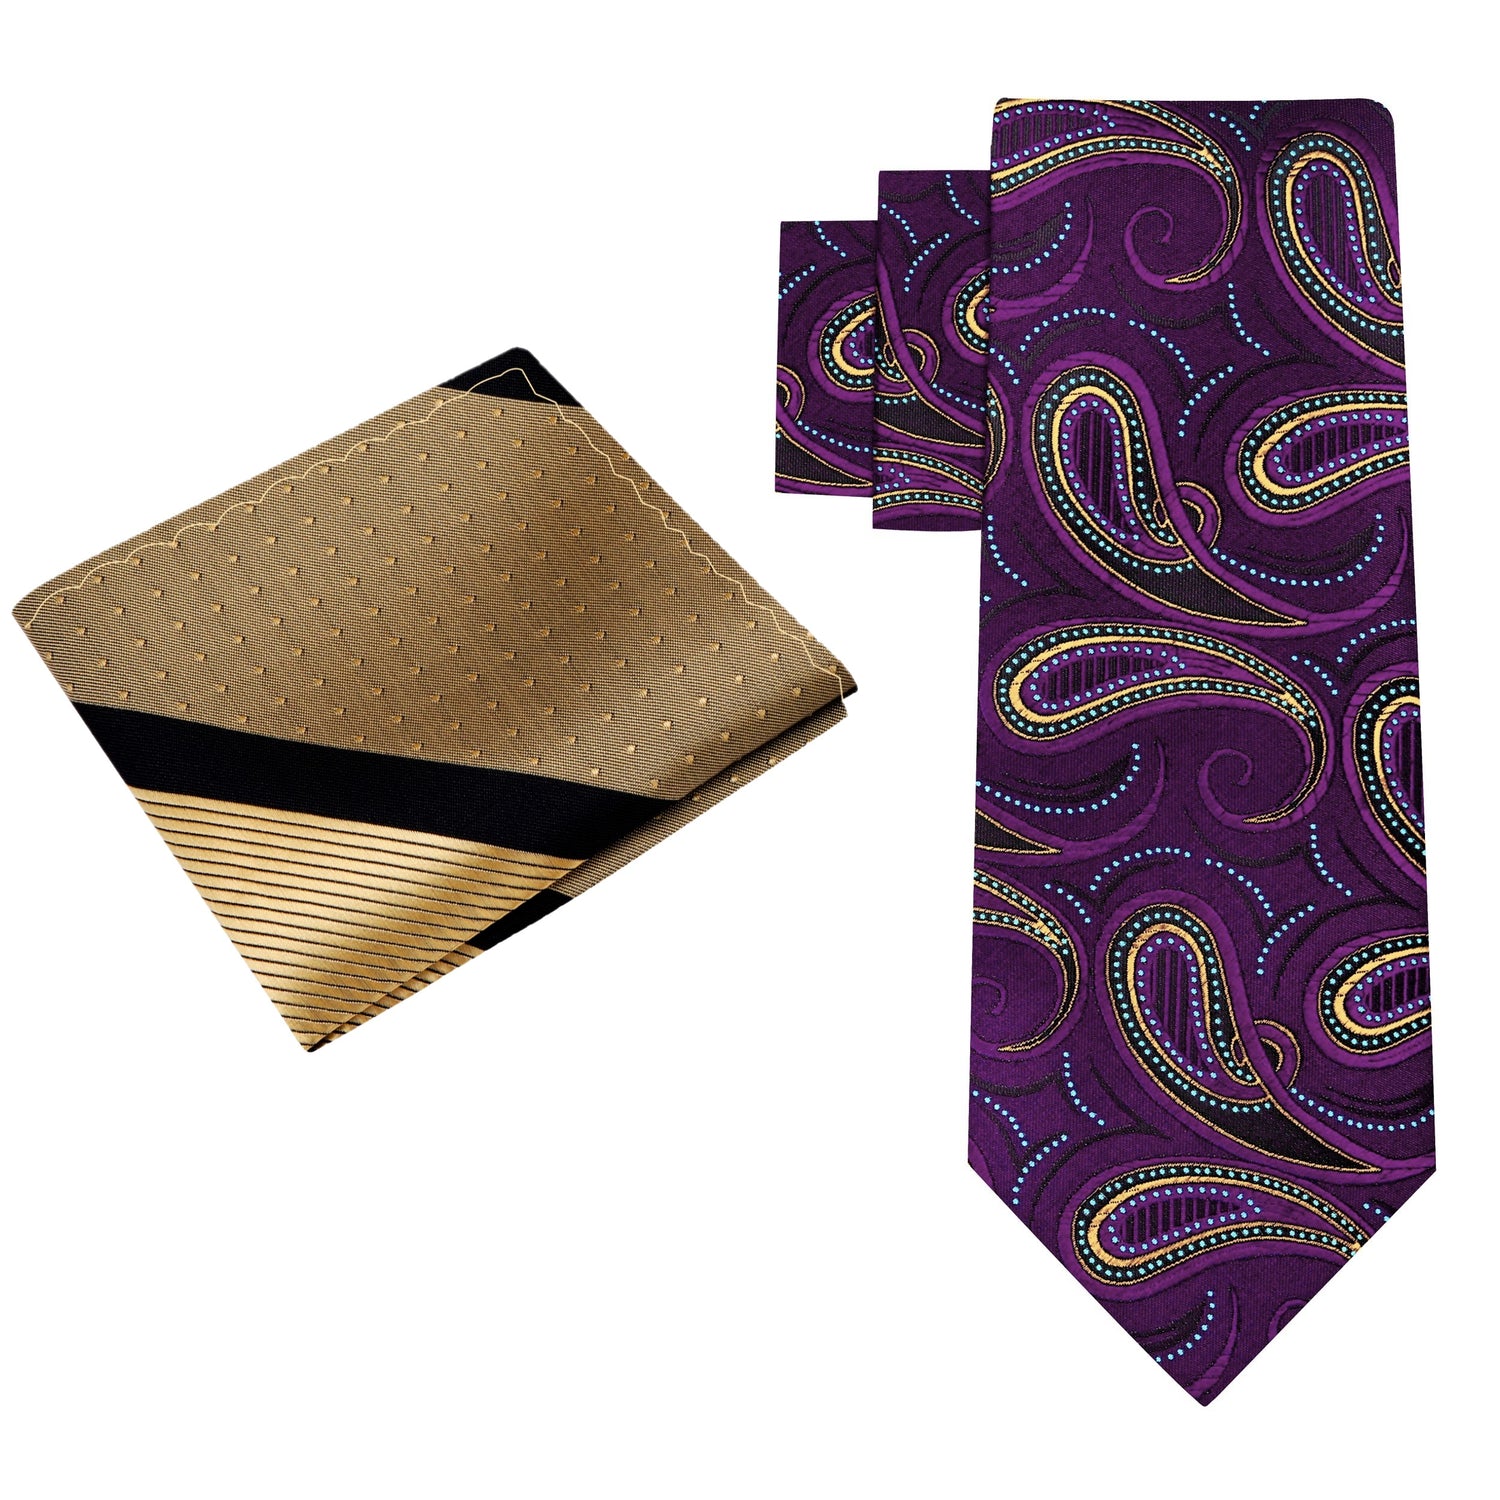 View 2: Purple Paisley Necktie with Gold and Black Pocket Square